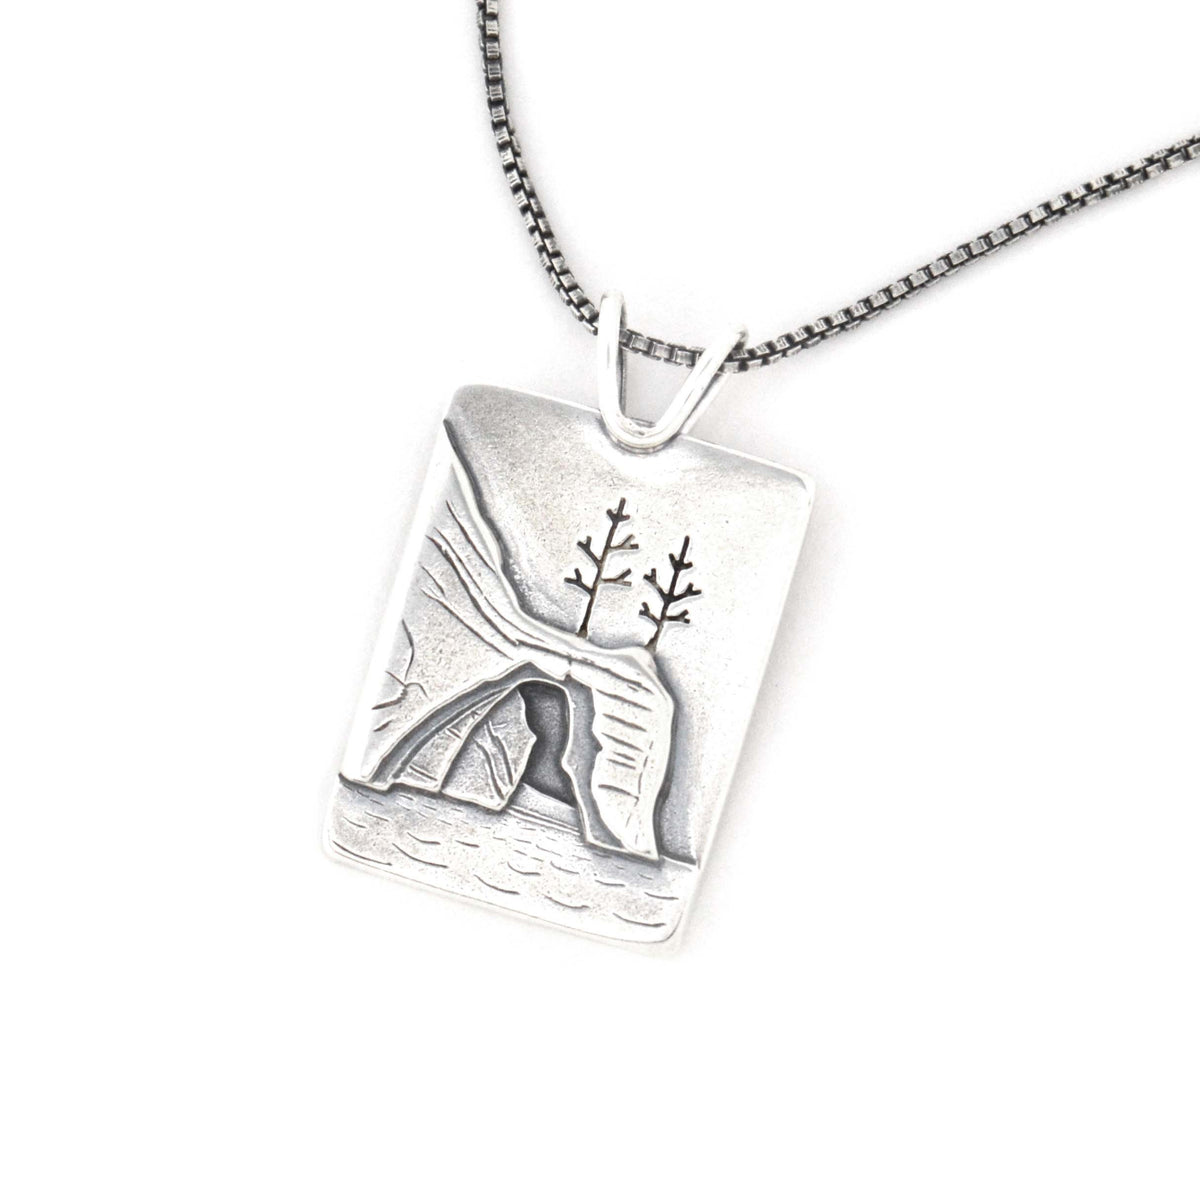 Pictured Rocks Pendant - Silver Pendant   3872 - handmade by Beth Millner Jewelry